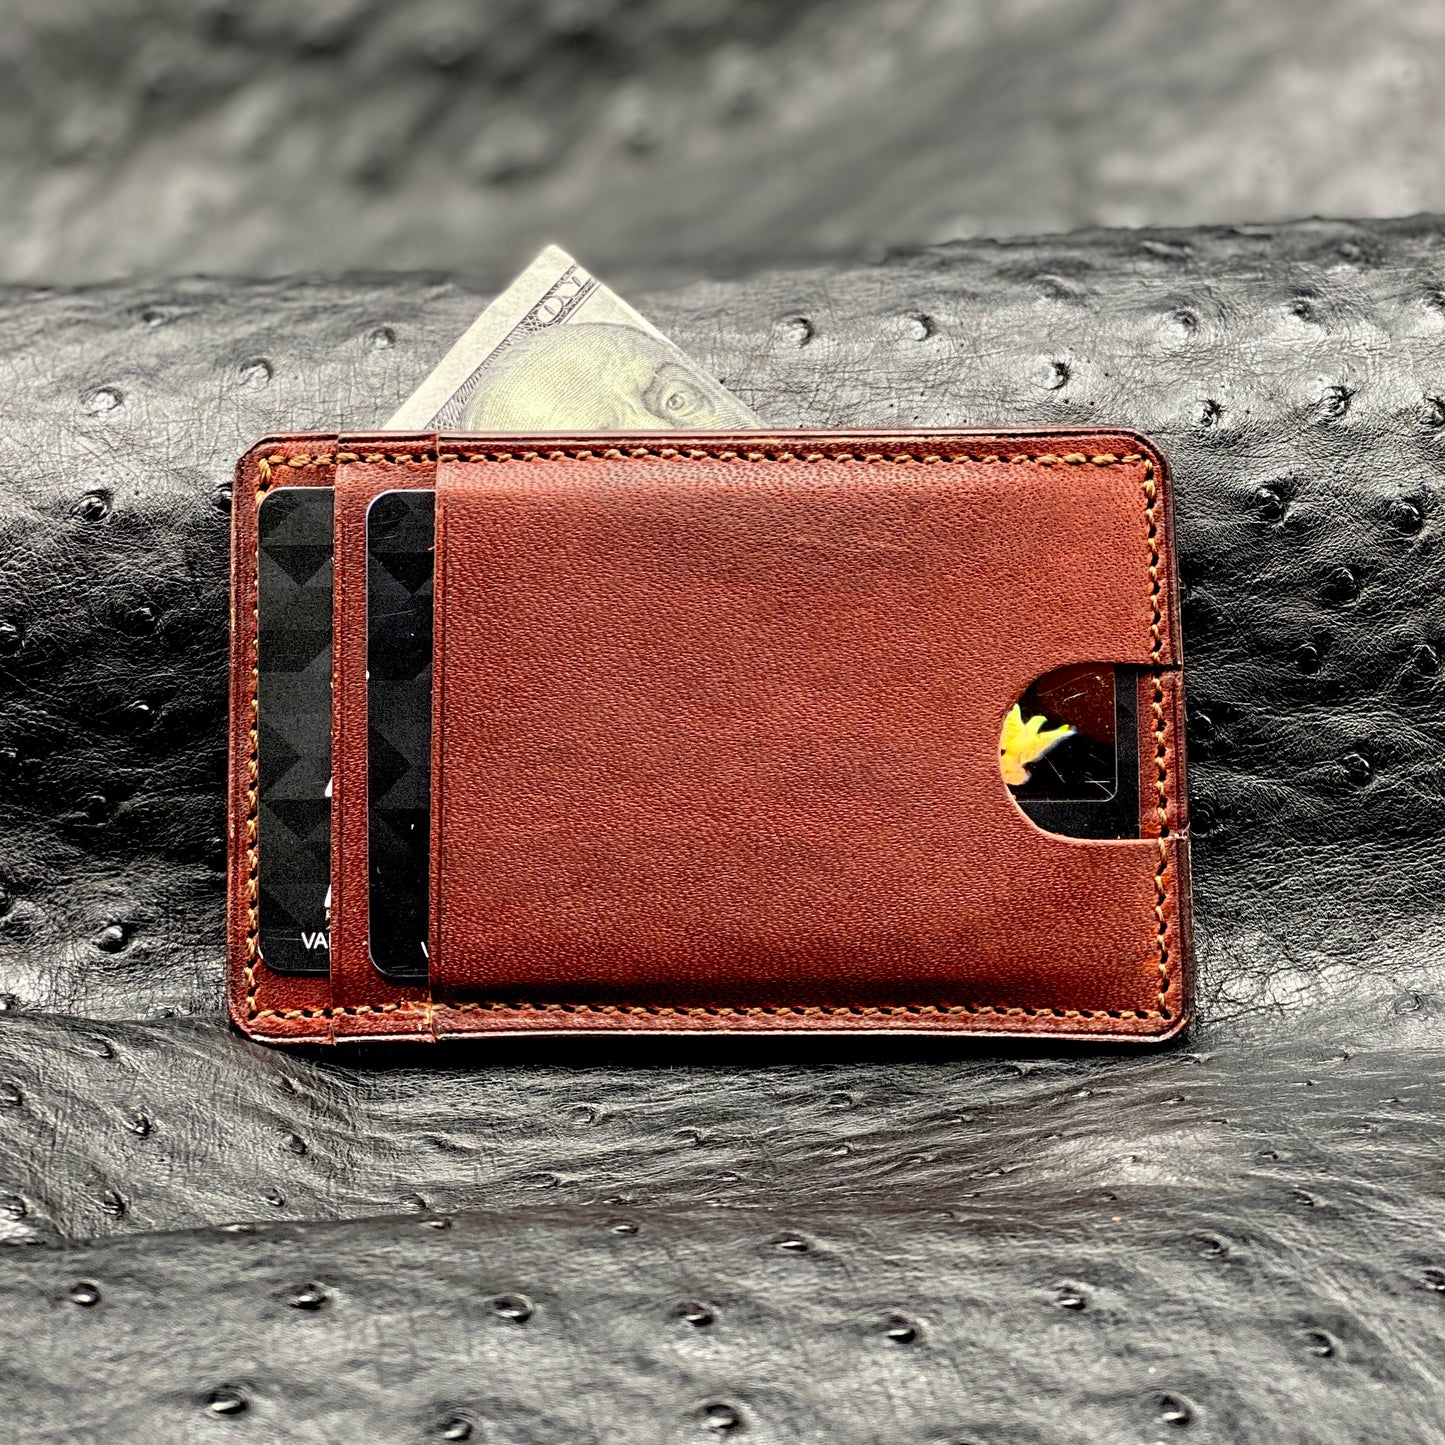 Designer EDC Minimalist MiniMax V2 wallet in Russet Brown Horween Leather | made in Houston | Custom Leather and Pen